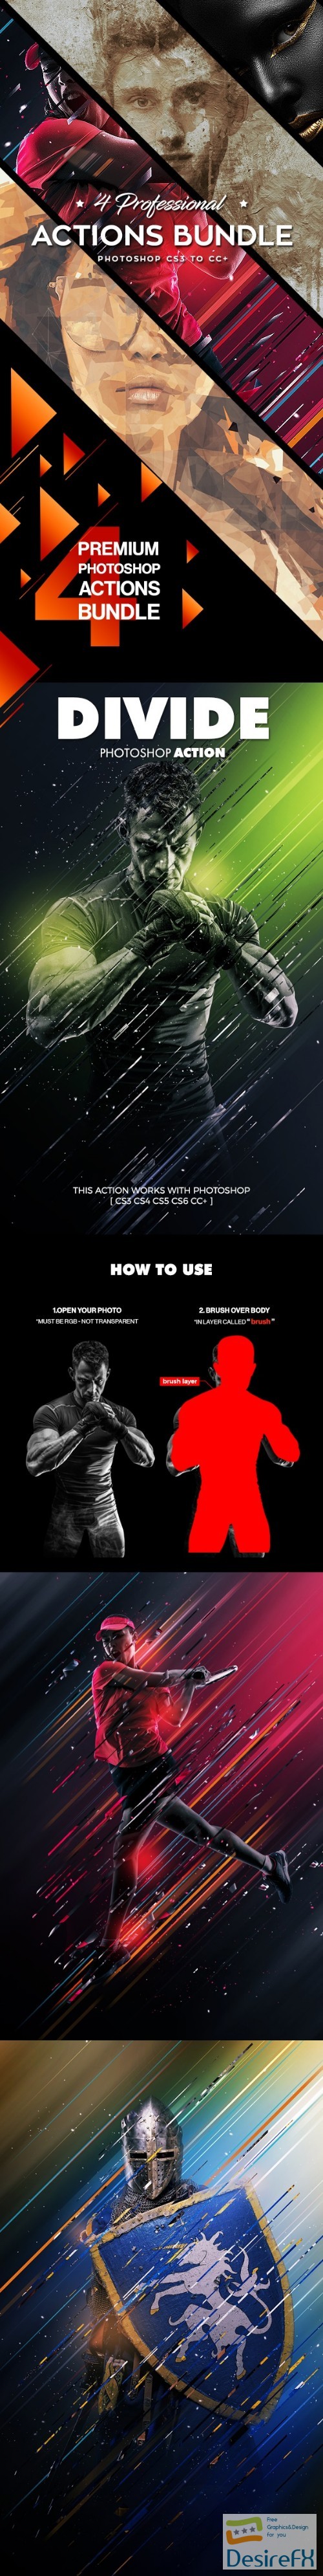 GraphicRiver - 2017 Four In One 3 Actions Bundle 20963950